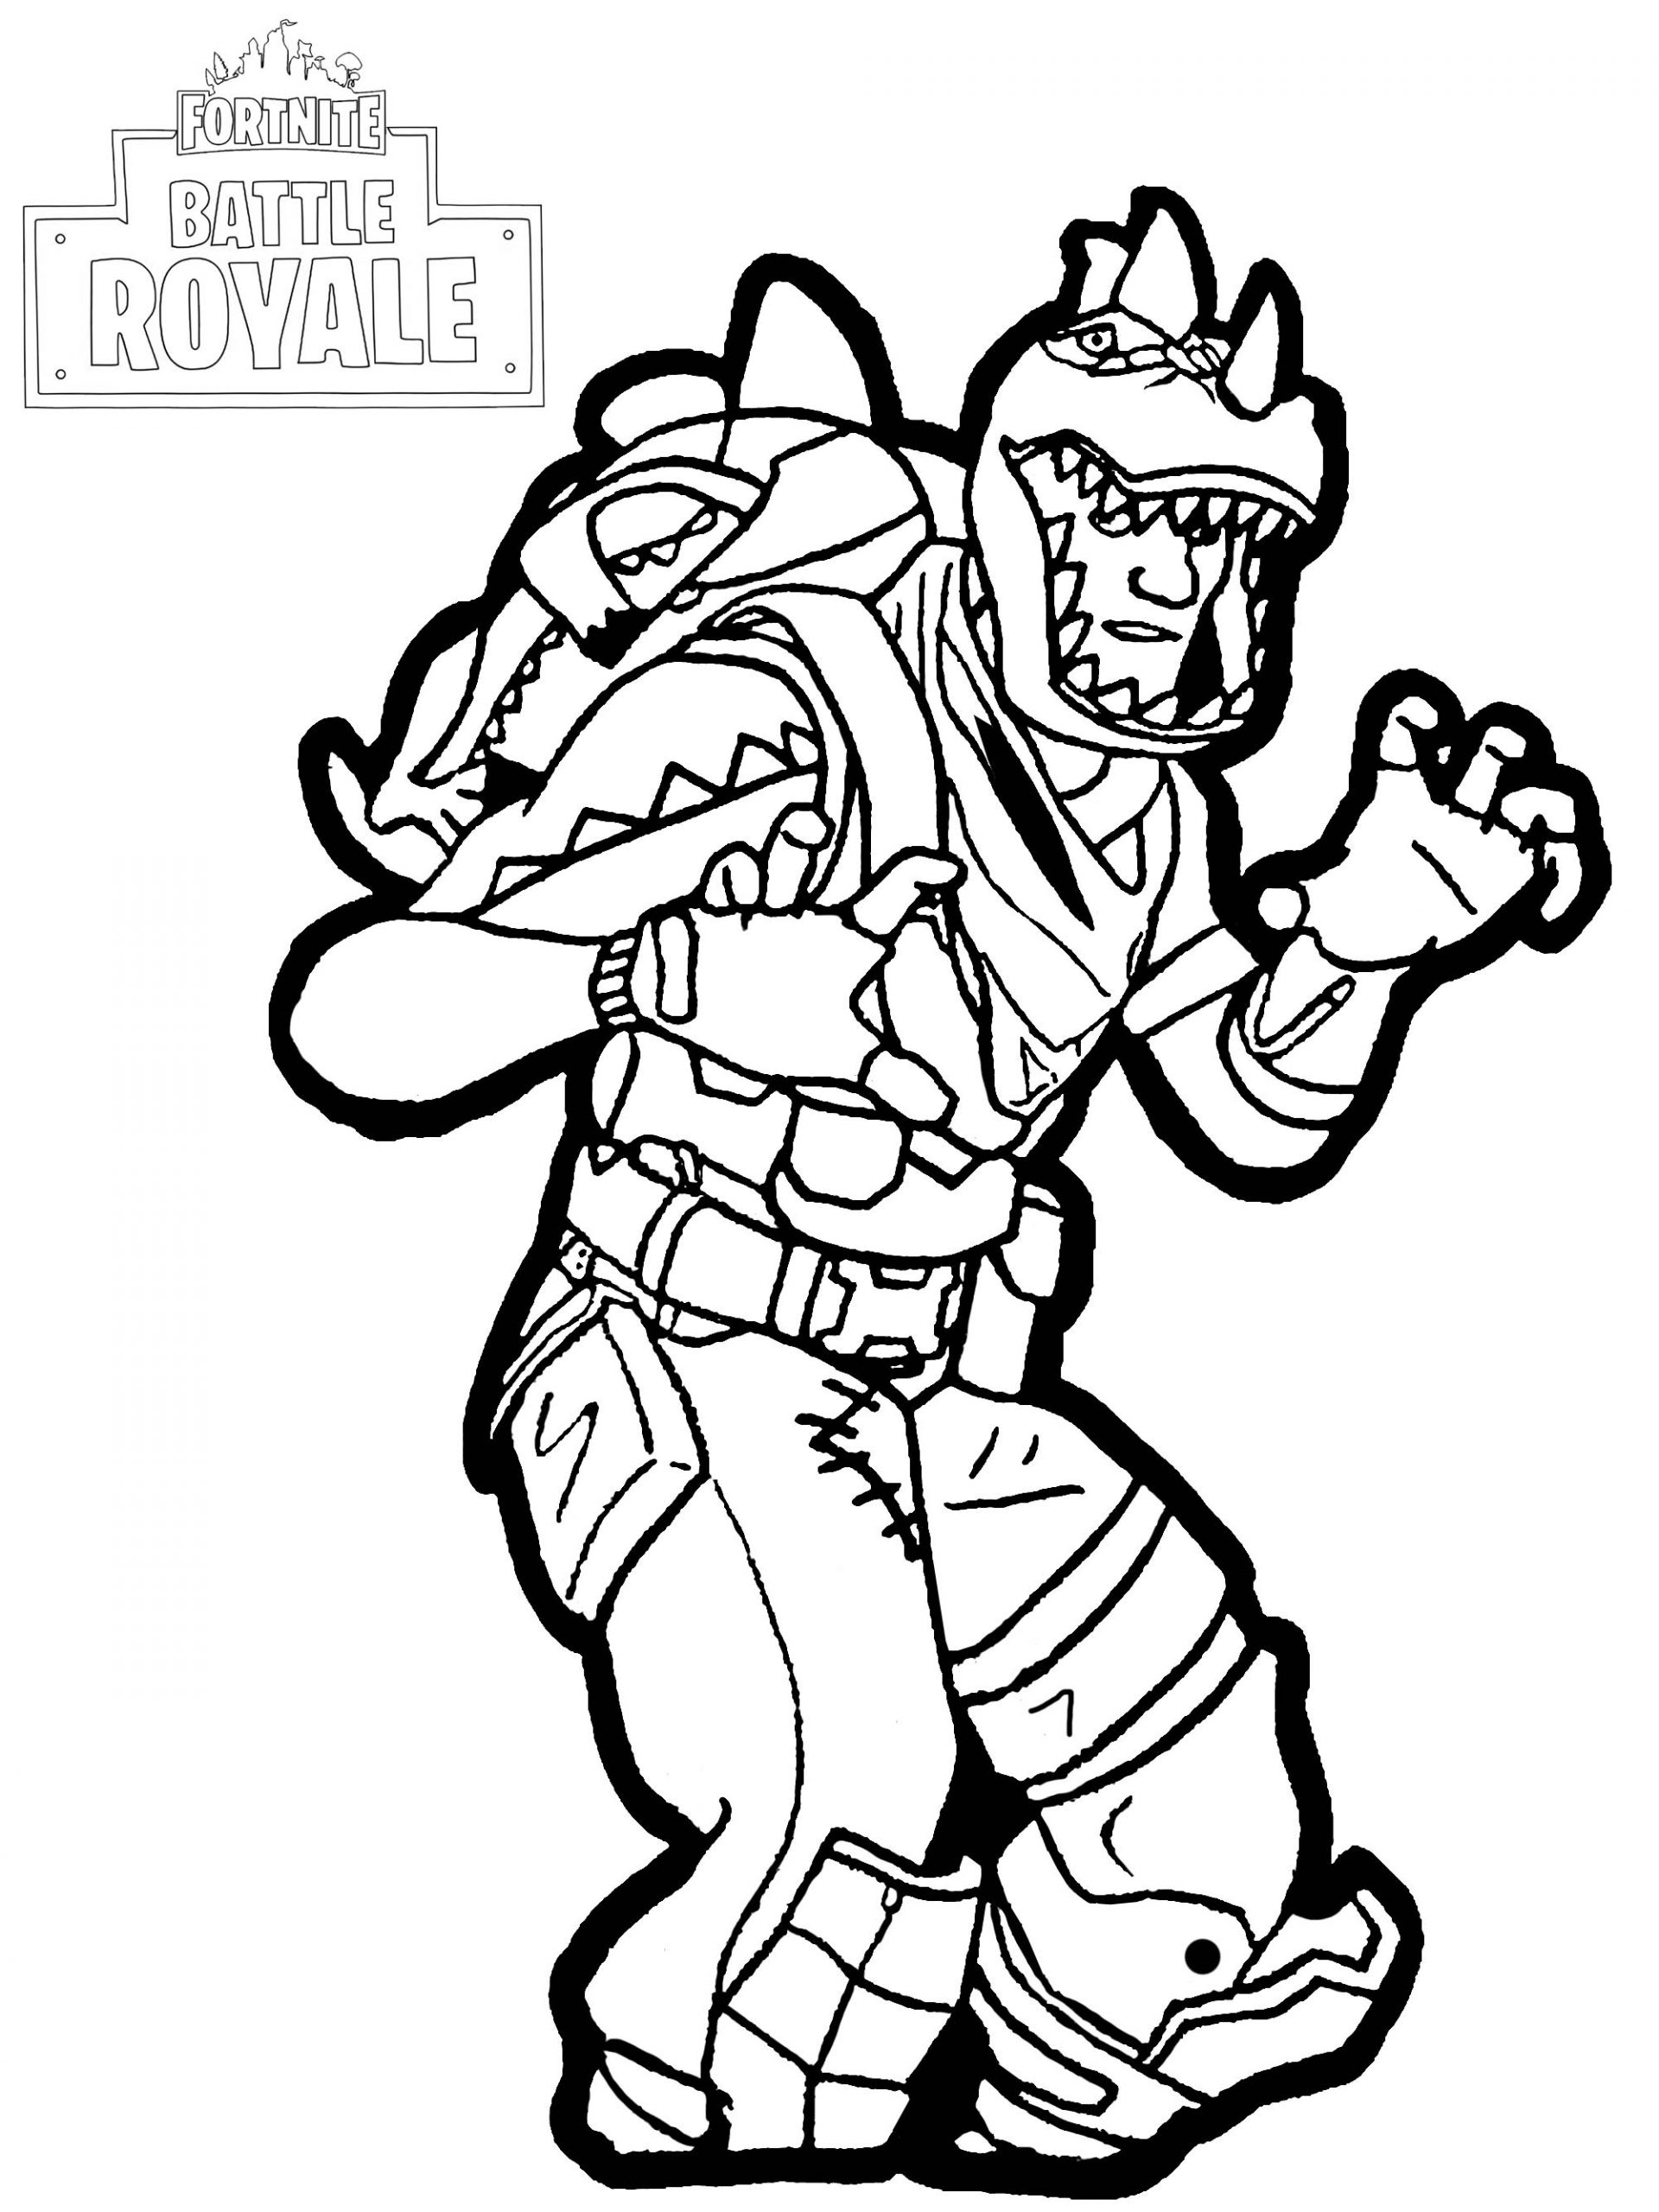 Red Knight Fortnite Coloring Page Free Printable Coloring Pages for Kids